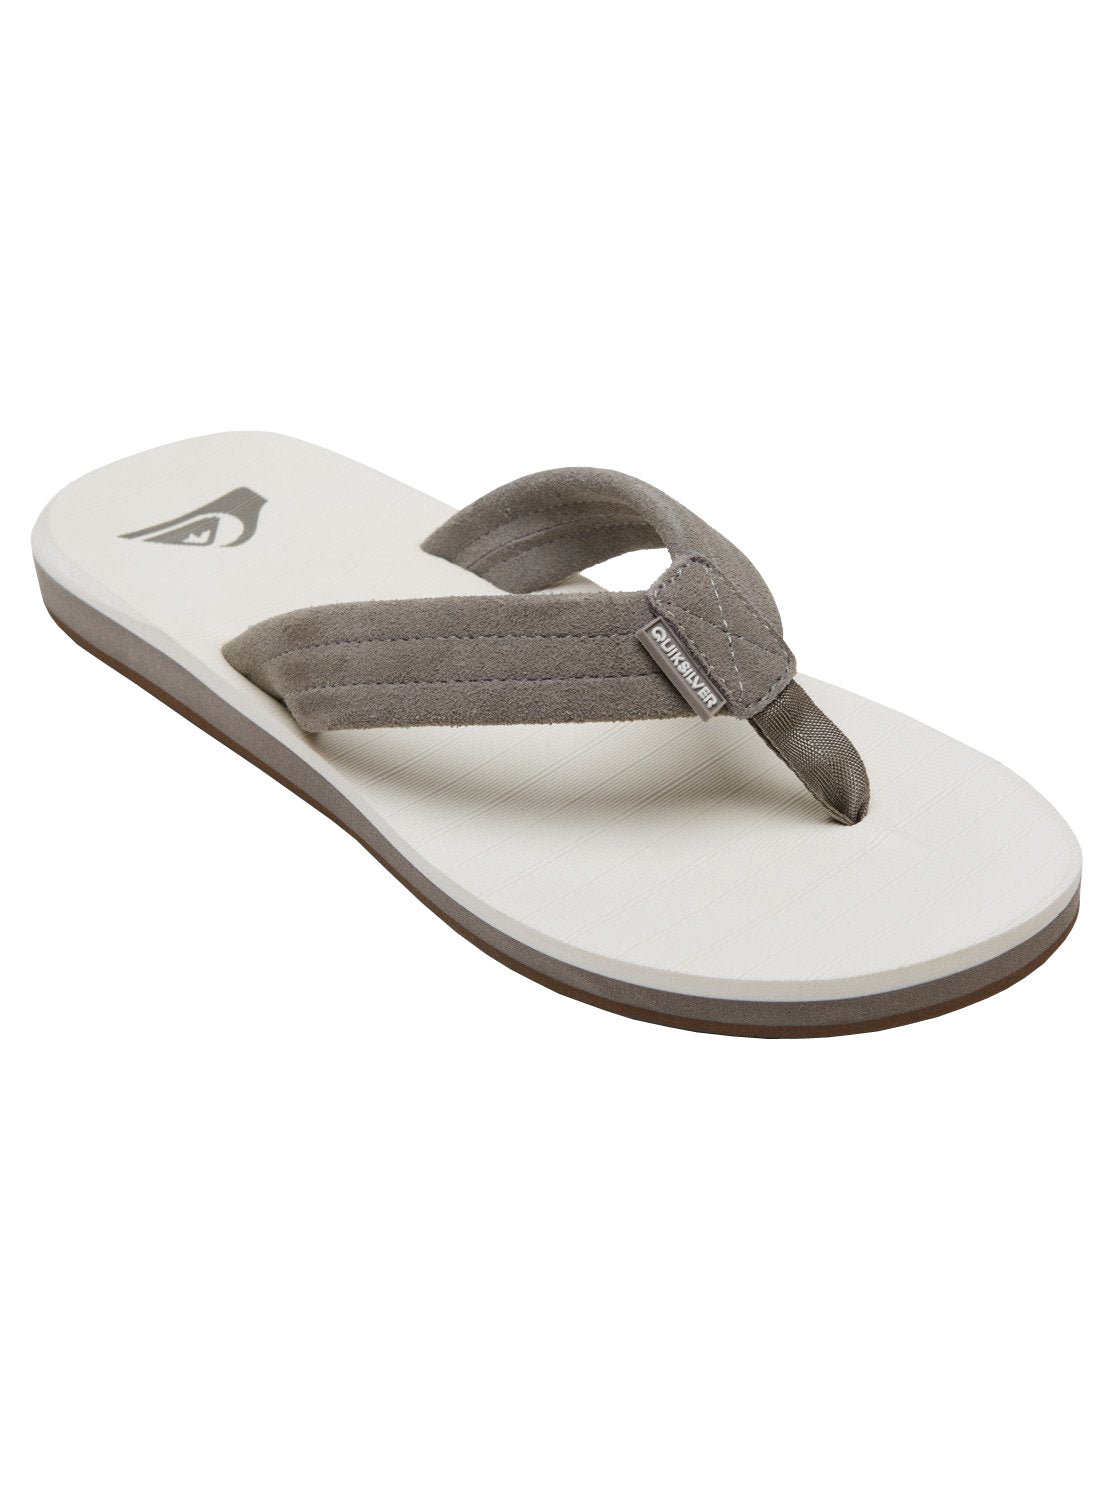 Quiksilver Carver Suede Mens Sandal XSWS-Grey-White-Grey 13